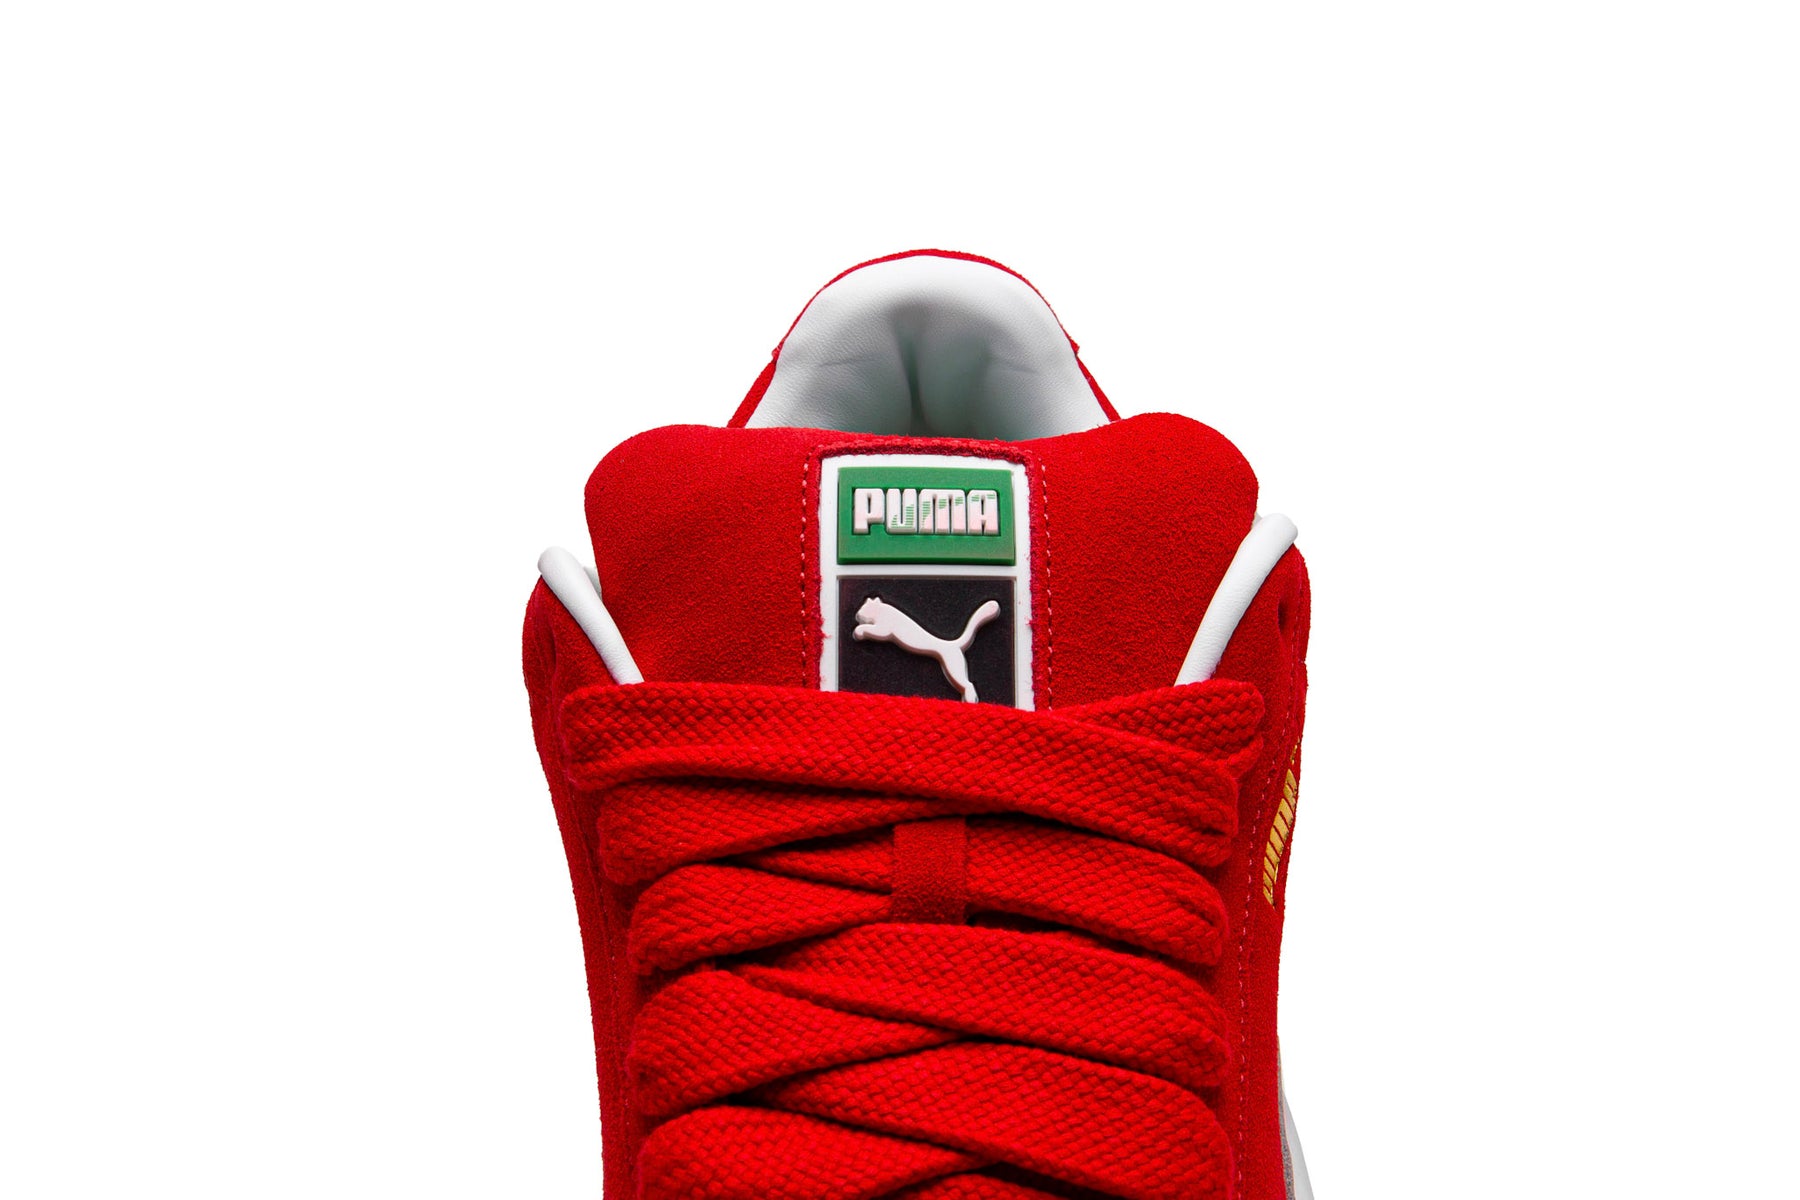 Puma Suede XL For All Time "Red" - Men